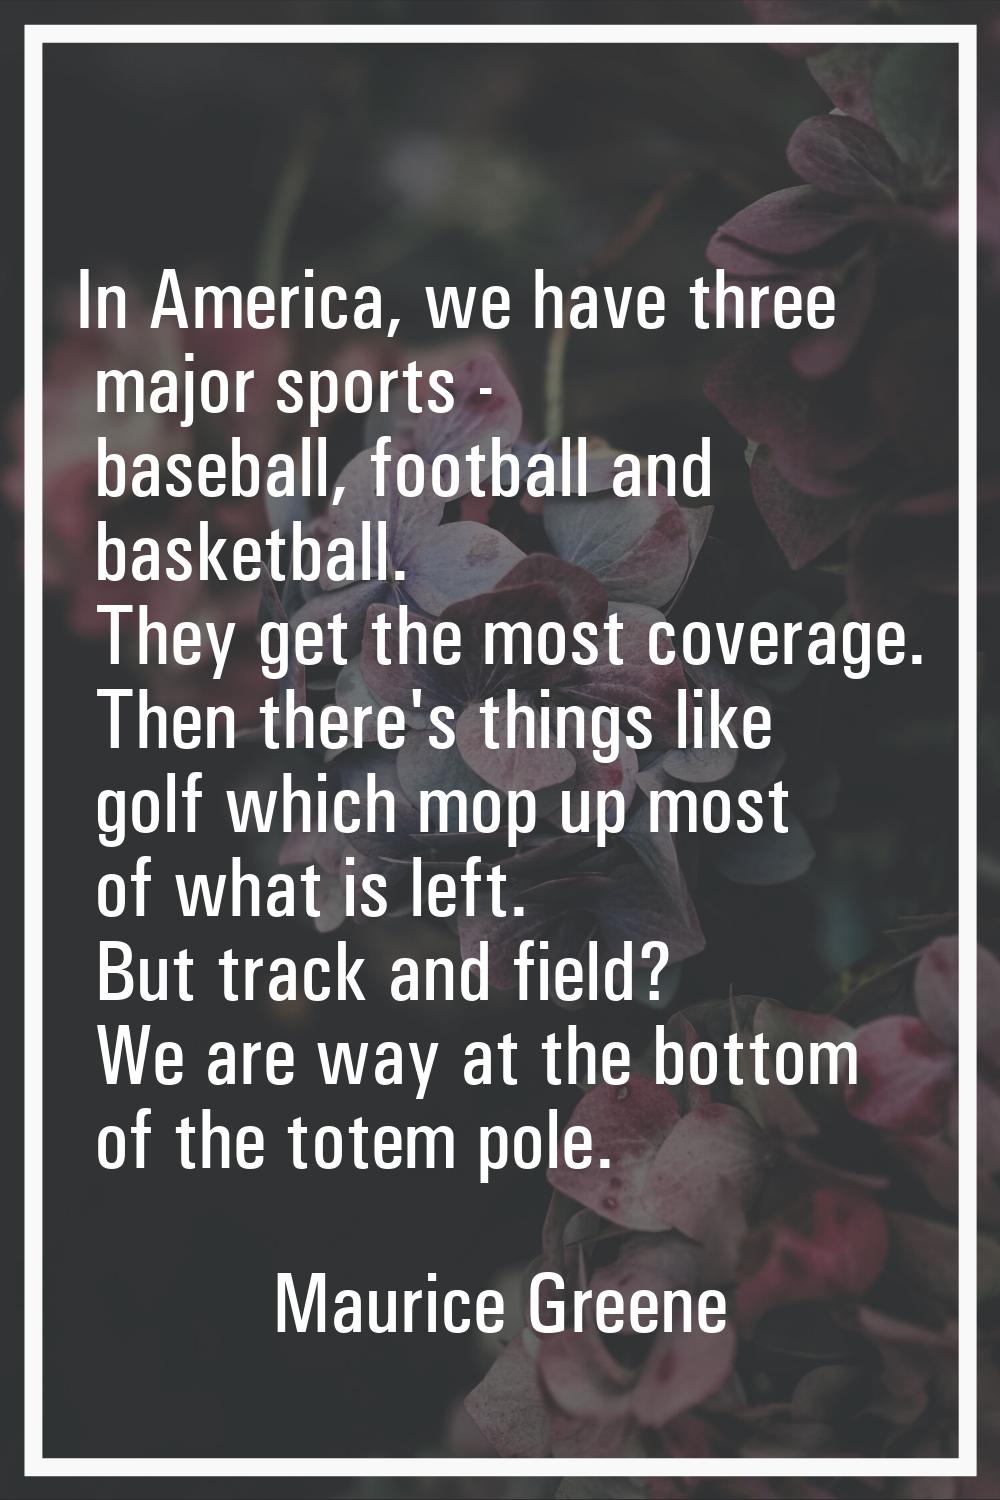 In America, we have three major sports - baseball, football and basketball. They get the most cover